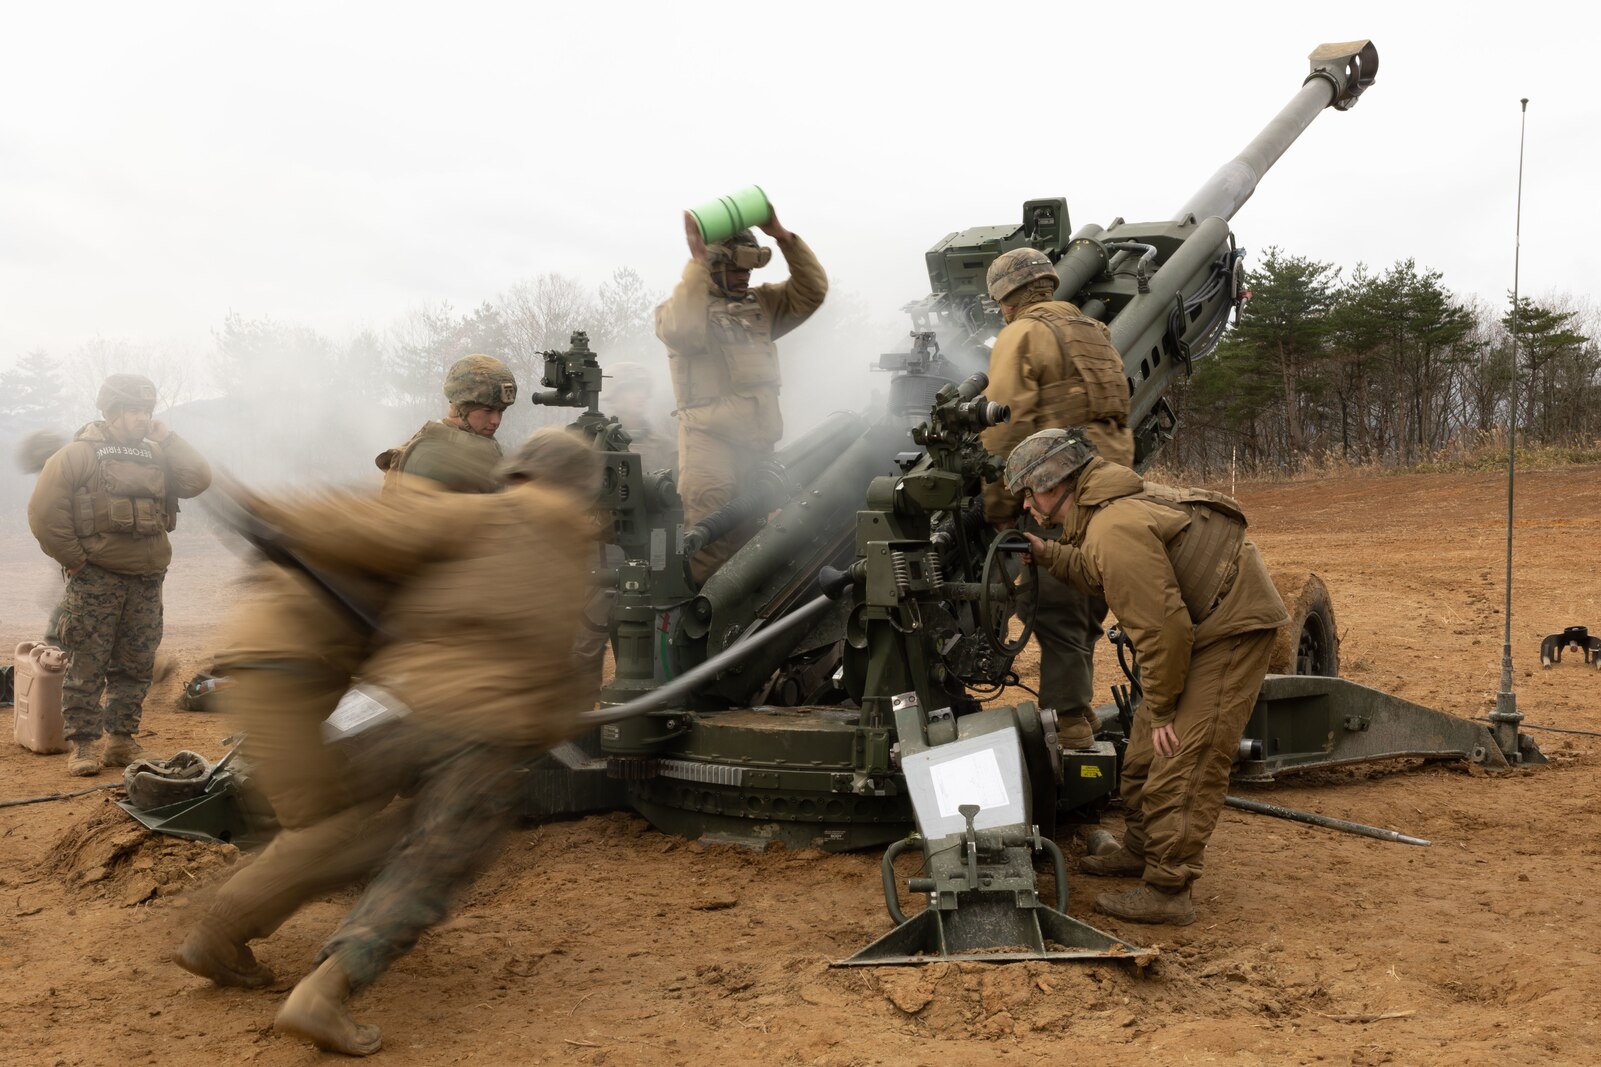 U.S. Marines with 3d Battalion, 12th Marines conduct live fire training during Artillery Relocation Training Program 22.3 at Ojojihara Maneuver Area, Japan, Dec. 1, 2022. The skills developed at ARTP increase the proficiency and readiness of the only permanently forward-deployed artillery unit in the Marine Corps, enabling them to provide precision indirect fires. (U.S. Marine Corps photo by Lance Cpl Eduardo Delatorre)